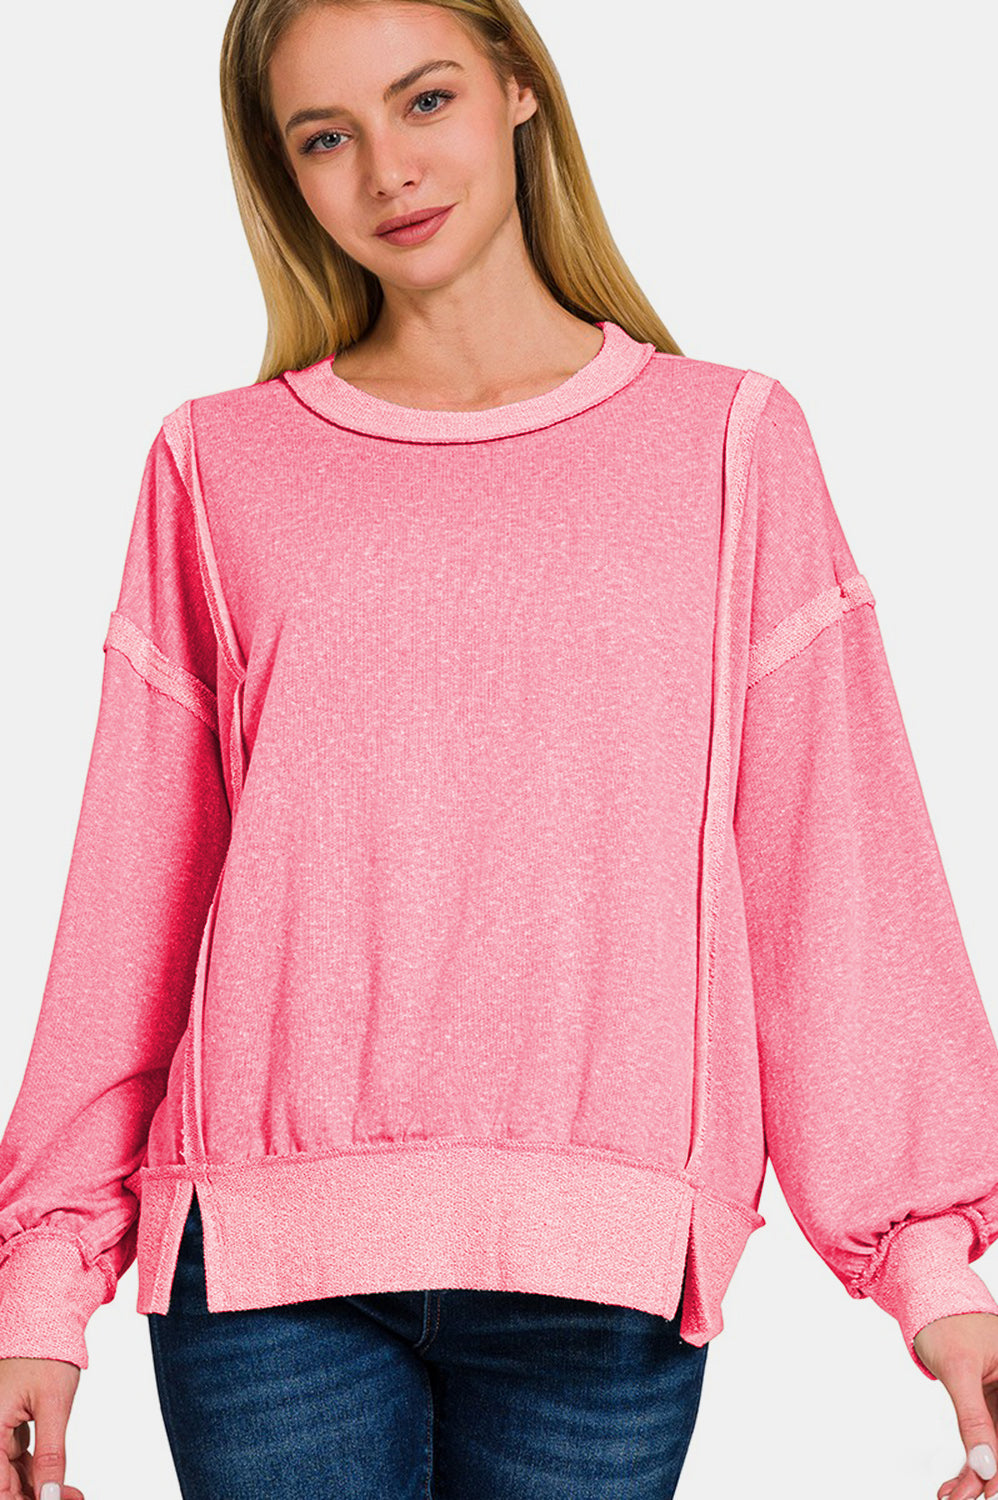 Washed Exposed-Seam Sweatshirt Casual Chic Botique